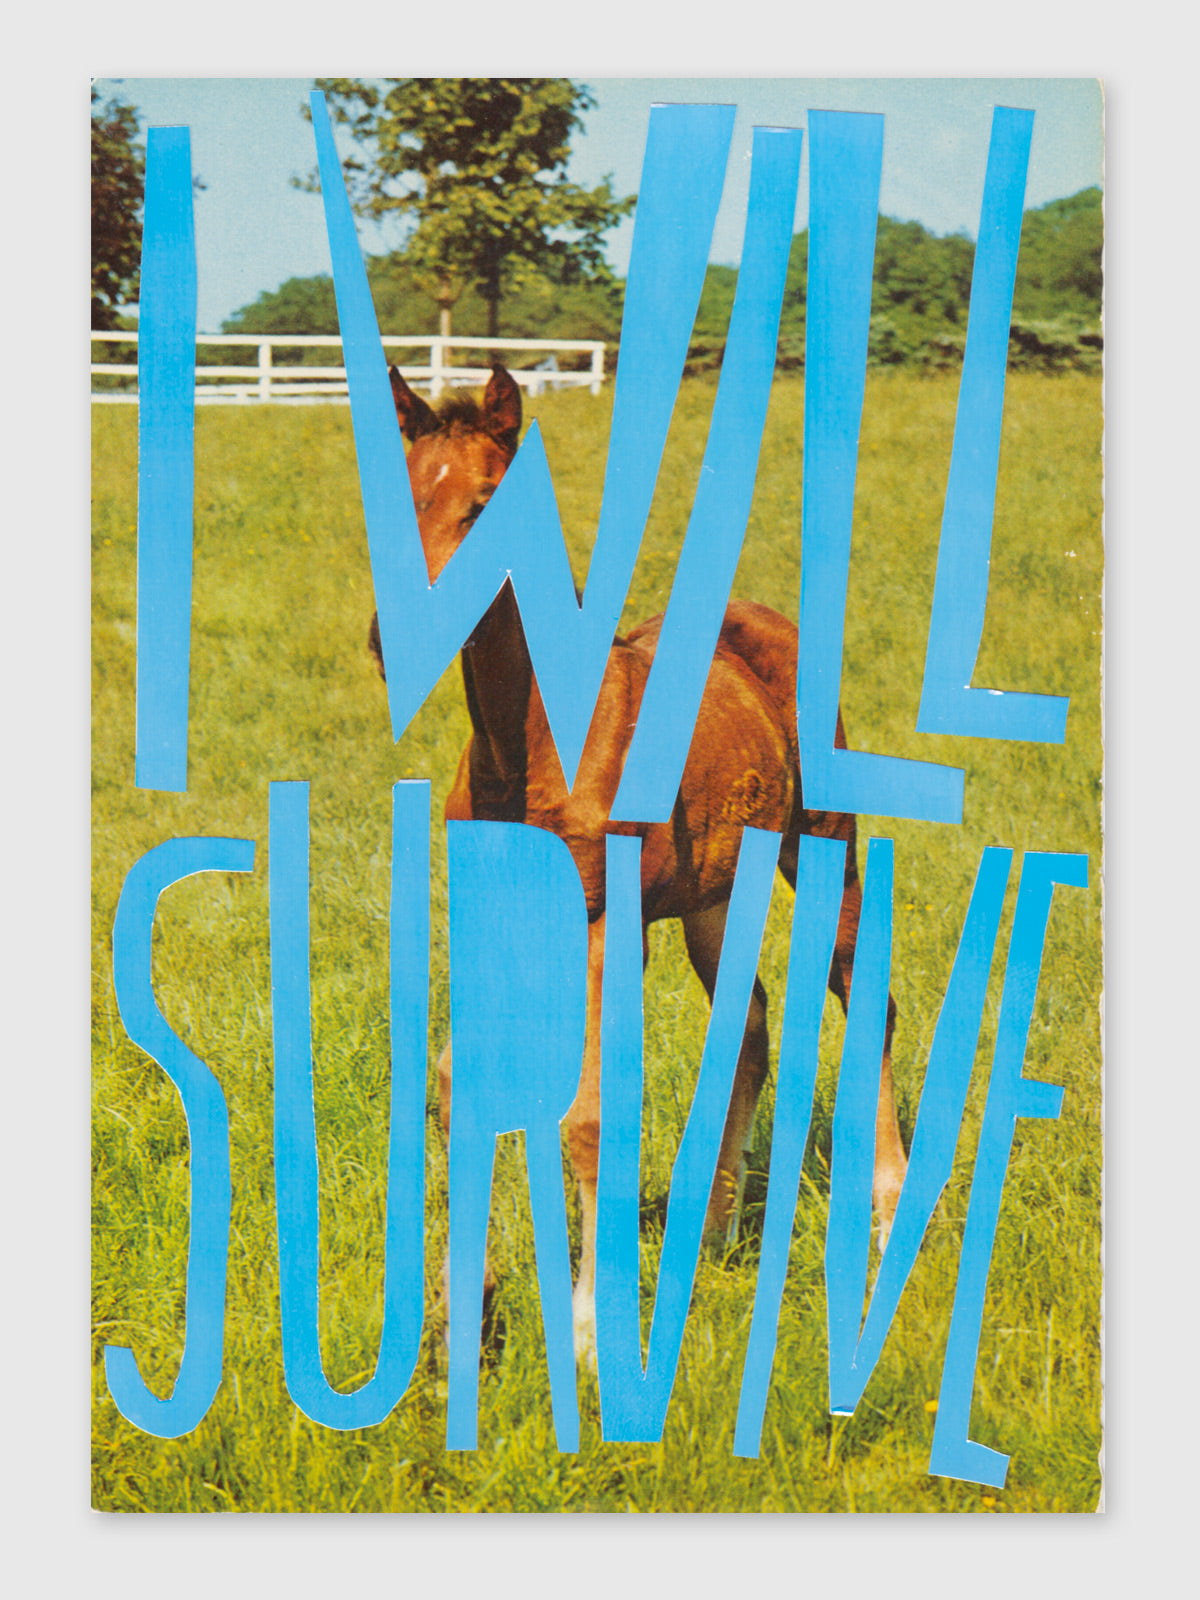 Collage – "I will survive"